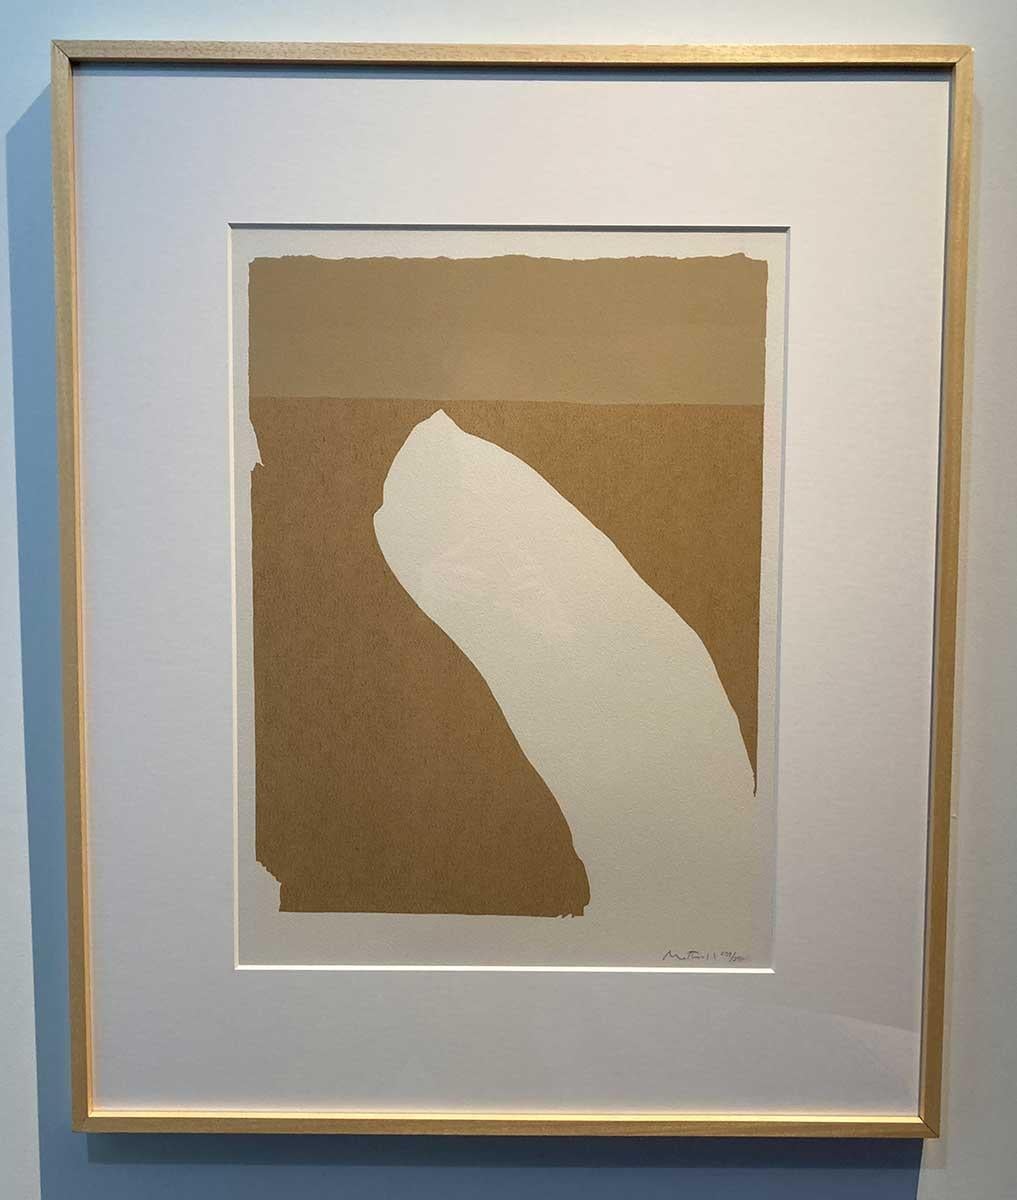 This screen print by Robert Motherwell, Untitled (from the Flight Portfolio) was printed on Arches Imperial paper in 1970. The print is hand signed in pencil and numbered 239/250 by the artist.

Tones in warm browns create a color field which is